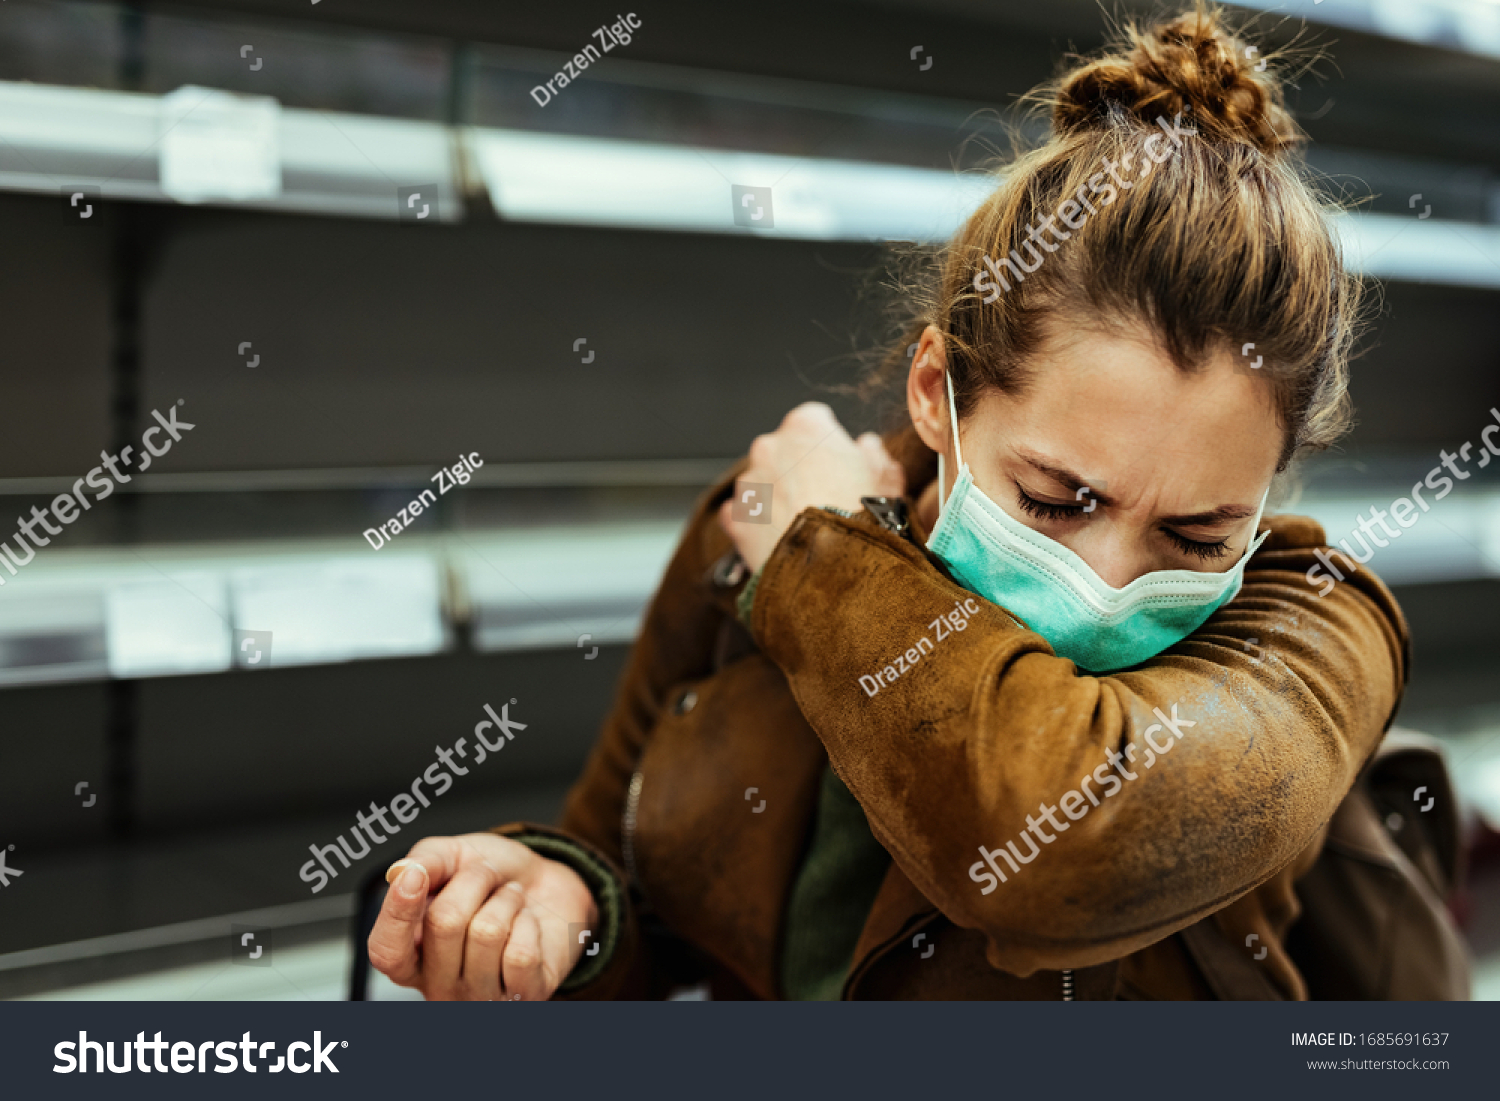 Sick woman buying in supermarket and coughing into elbow during COVID-19 pandemic.  #1685691637